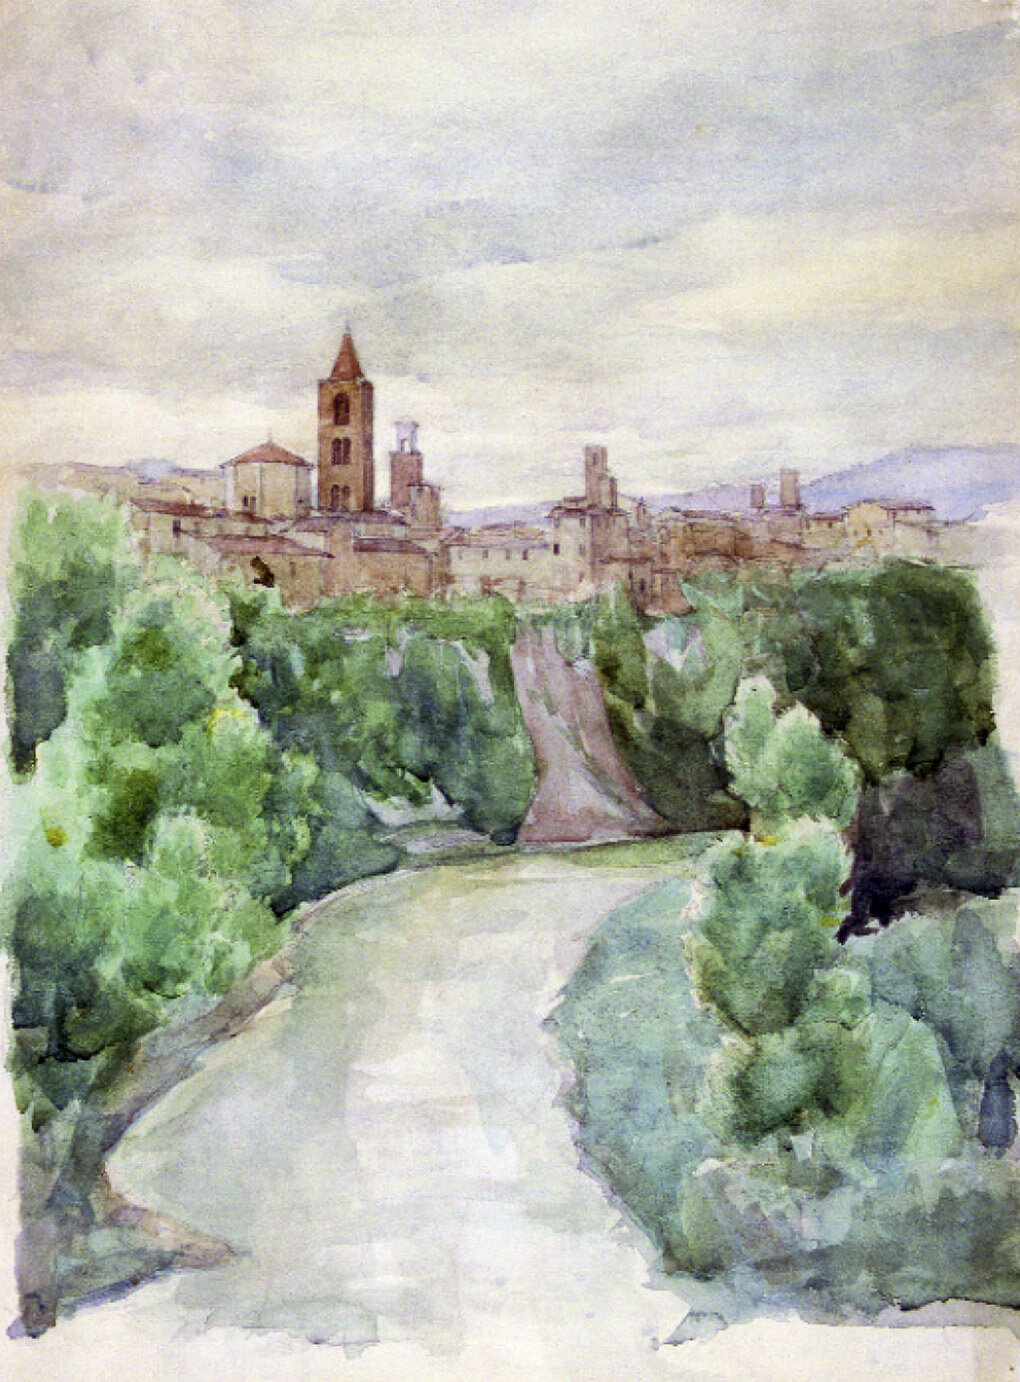 View of the Towers from the Campo Parignano Bridge